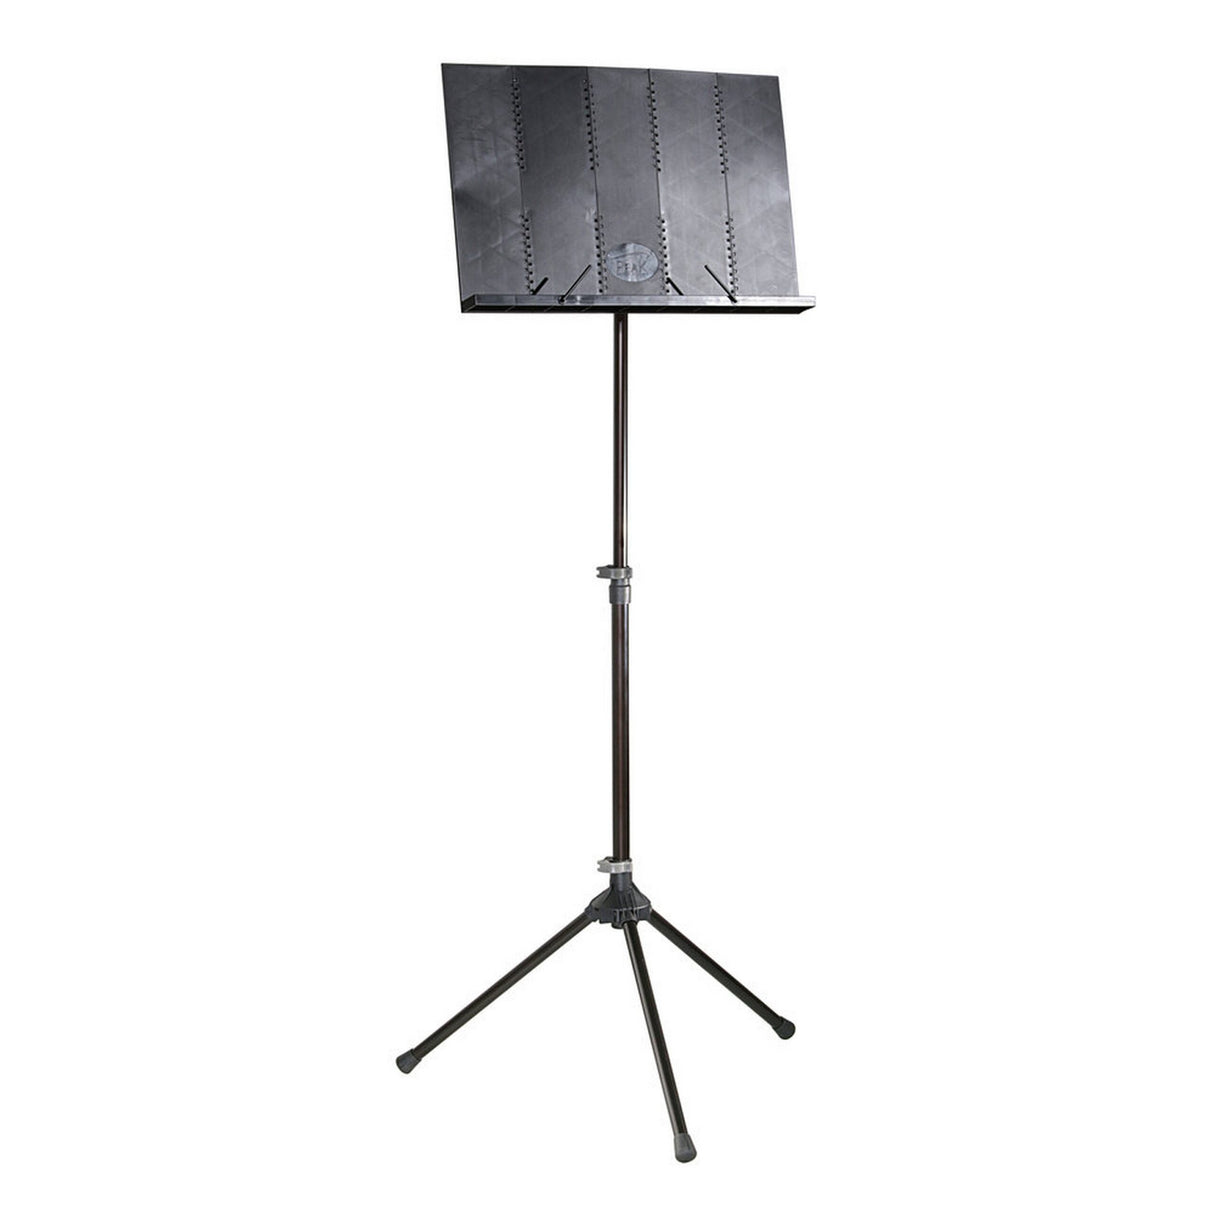 Peak Stands SMS-20 Single Stage Collapsible Desk Music Stand, Steel